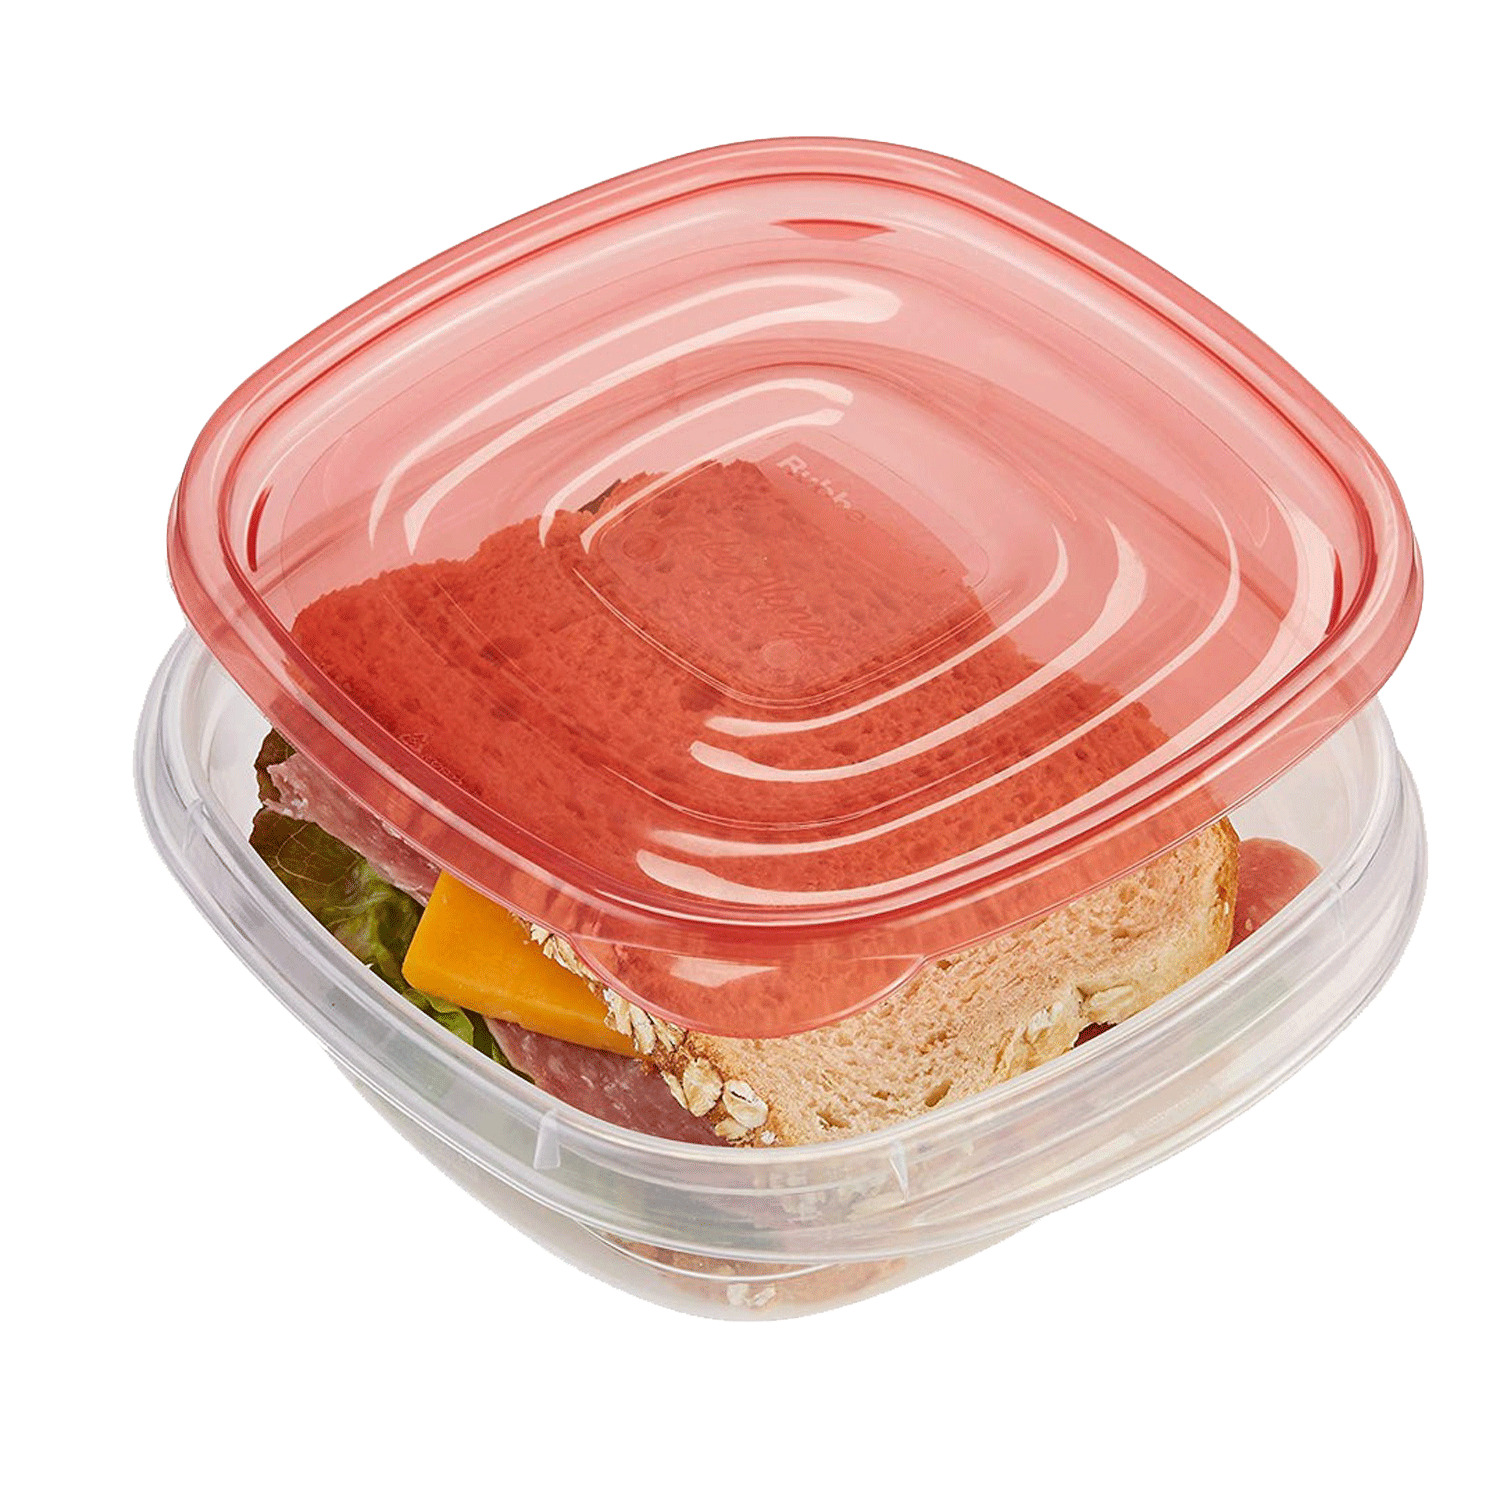 Rubbermaid - Take Alongs - Square food storage containers and lids